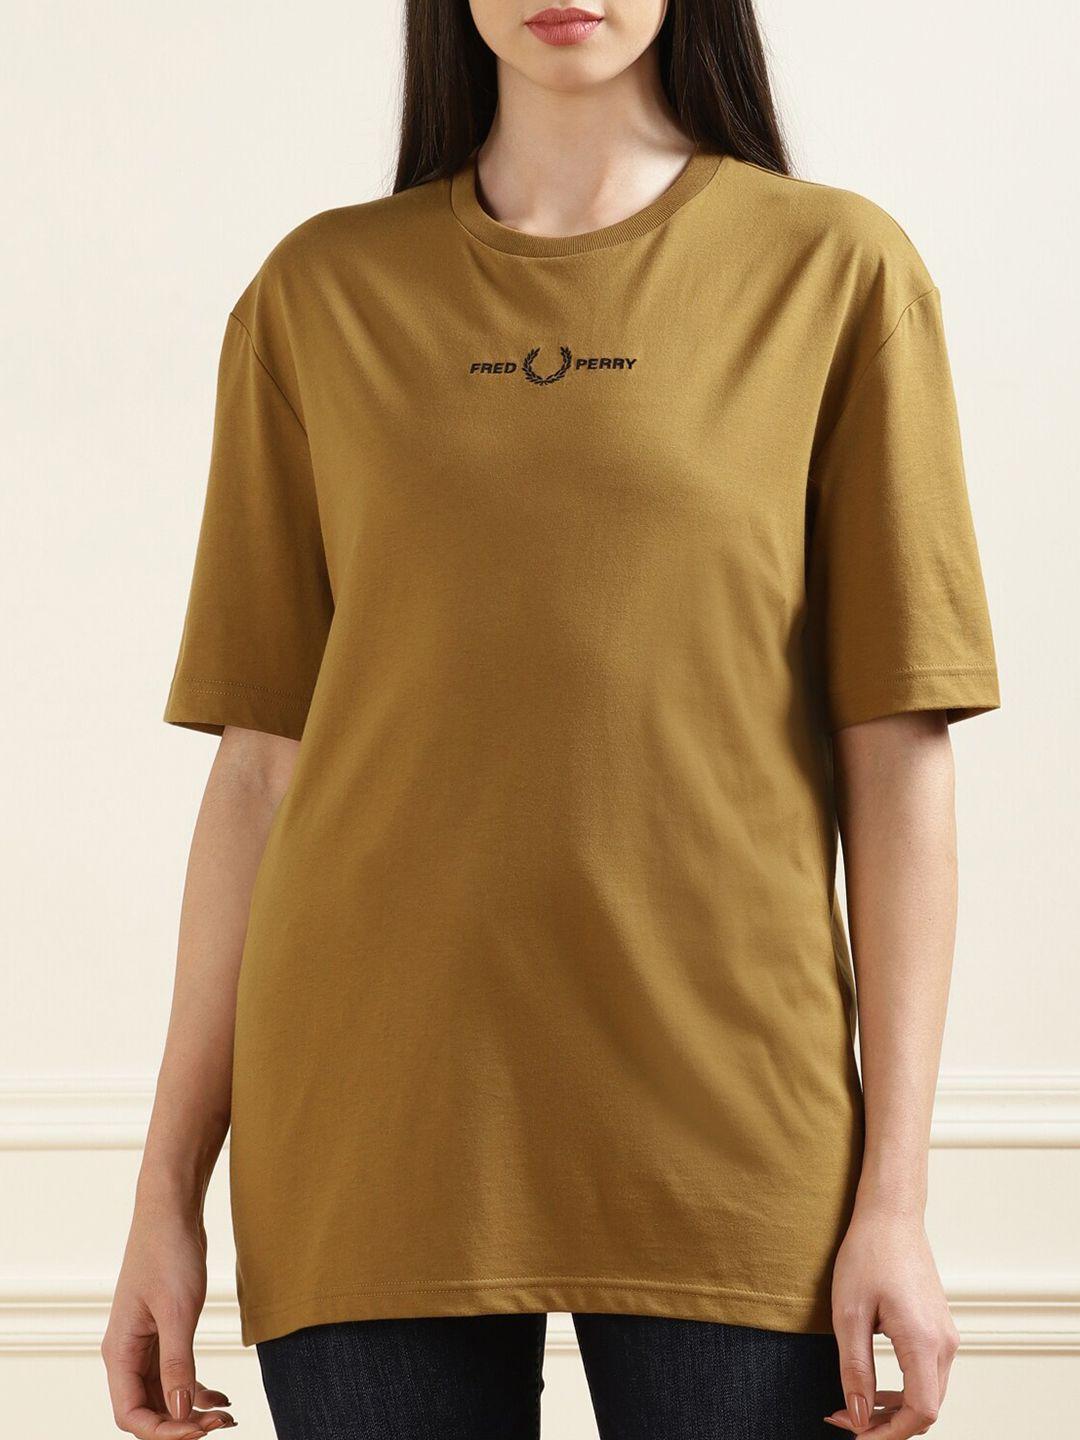 fred-perry-women-brown-typography-t-shirt